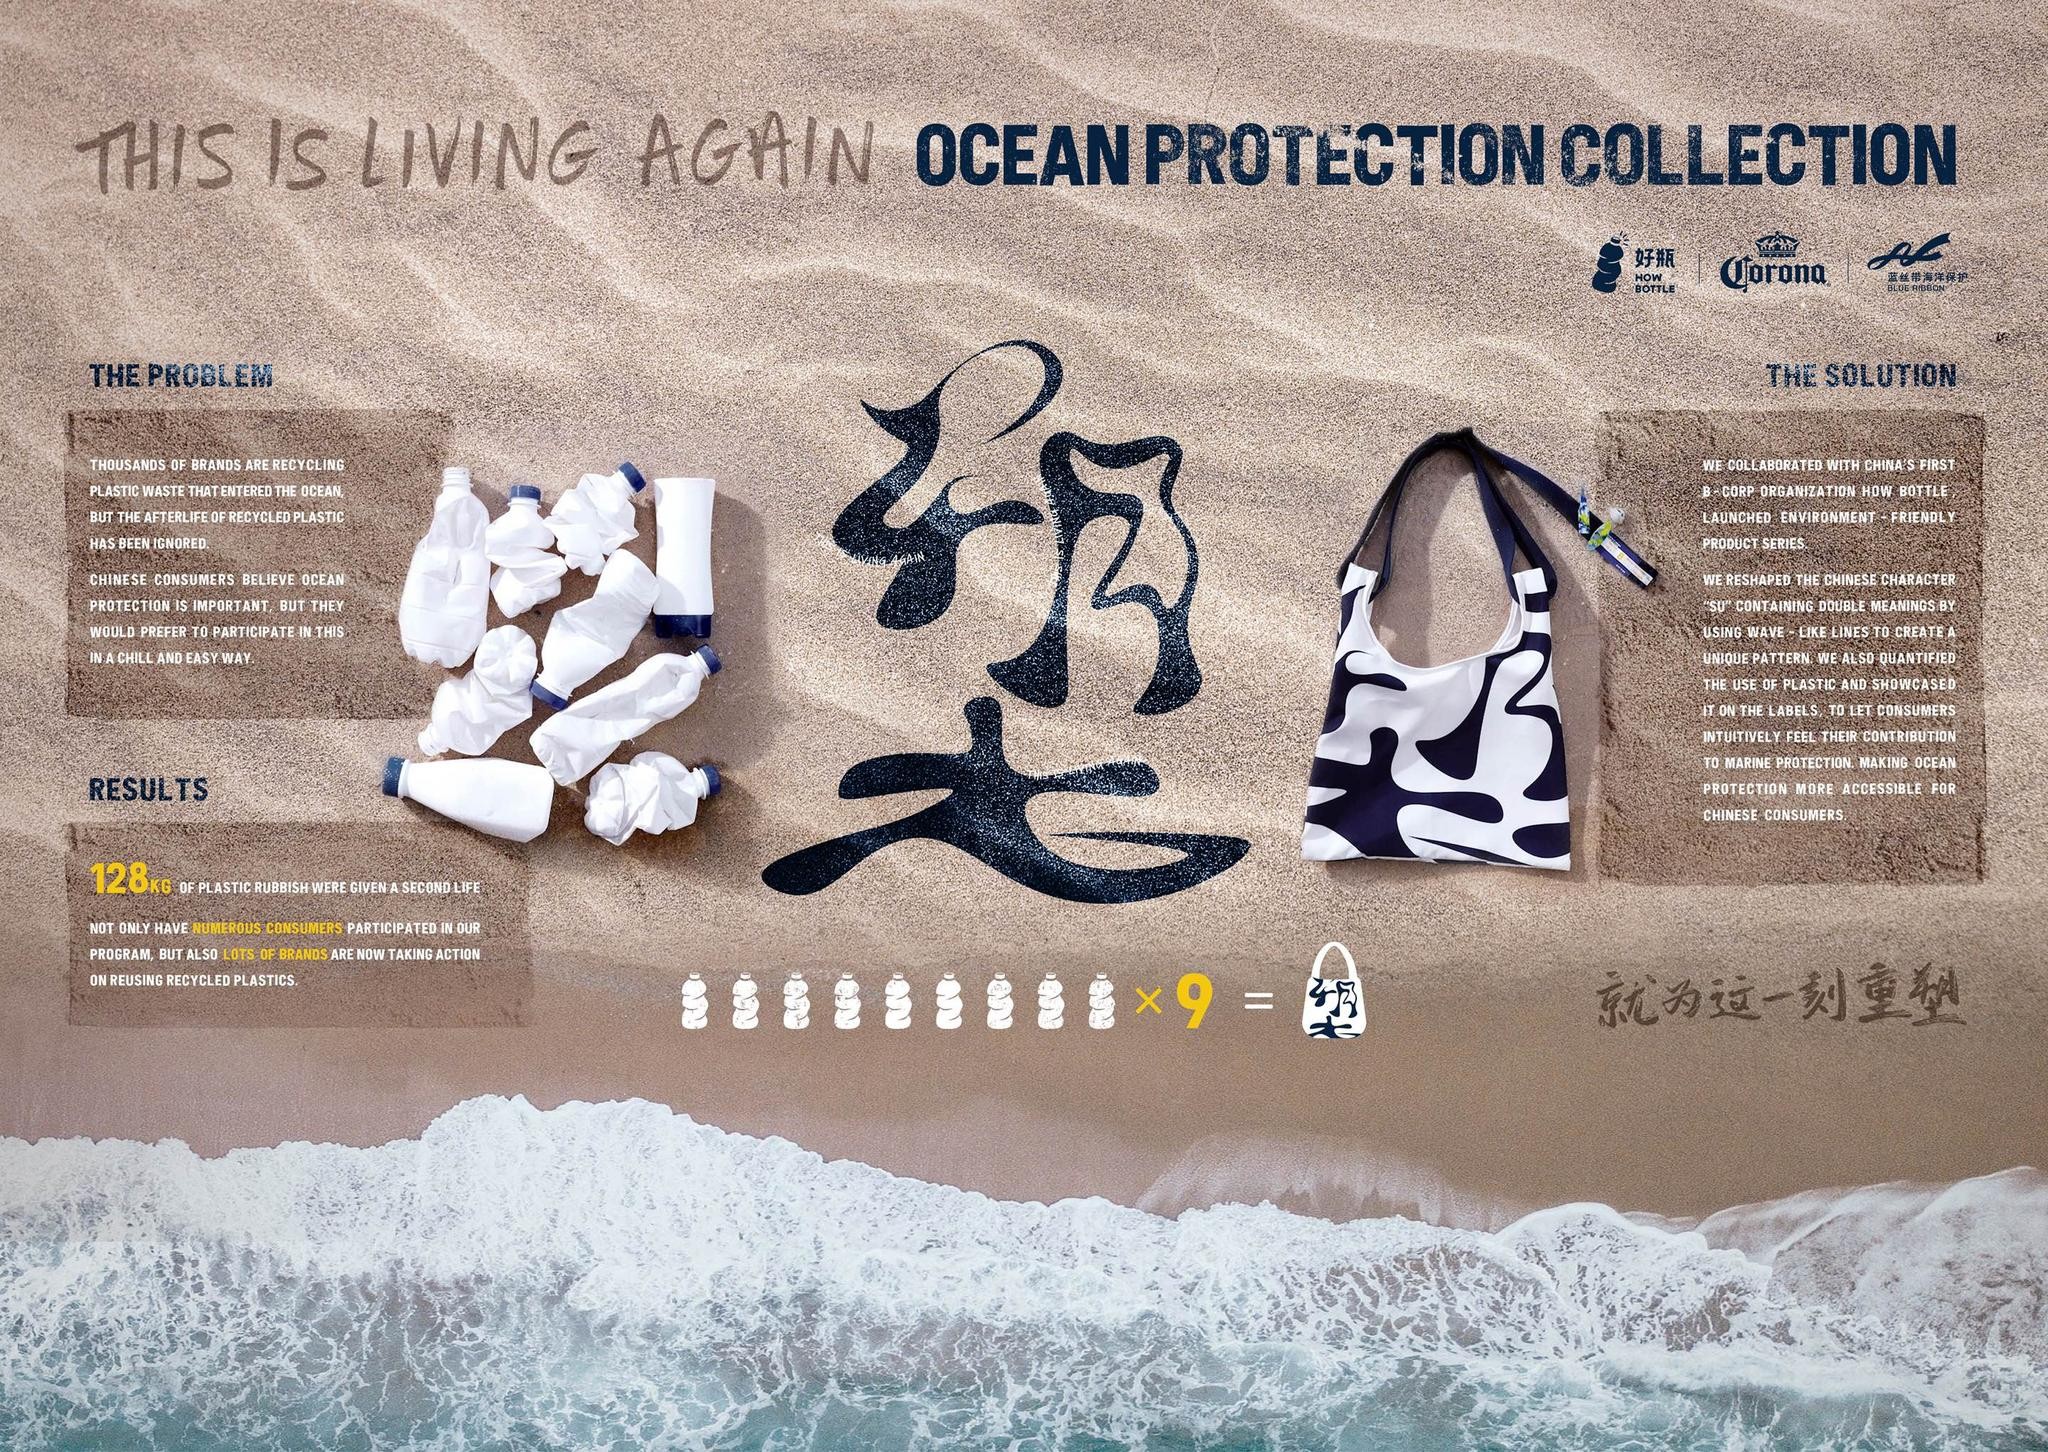 “This Is Living Again”, Yearly Ocean Protection Collection